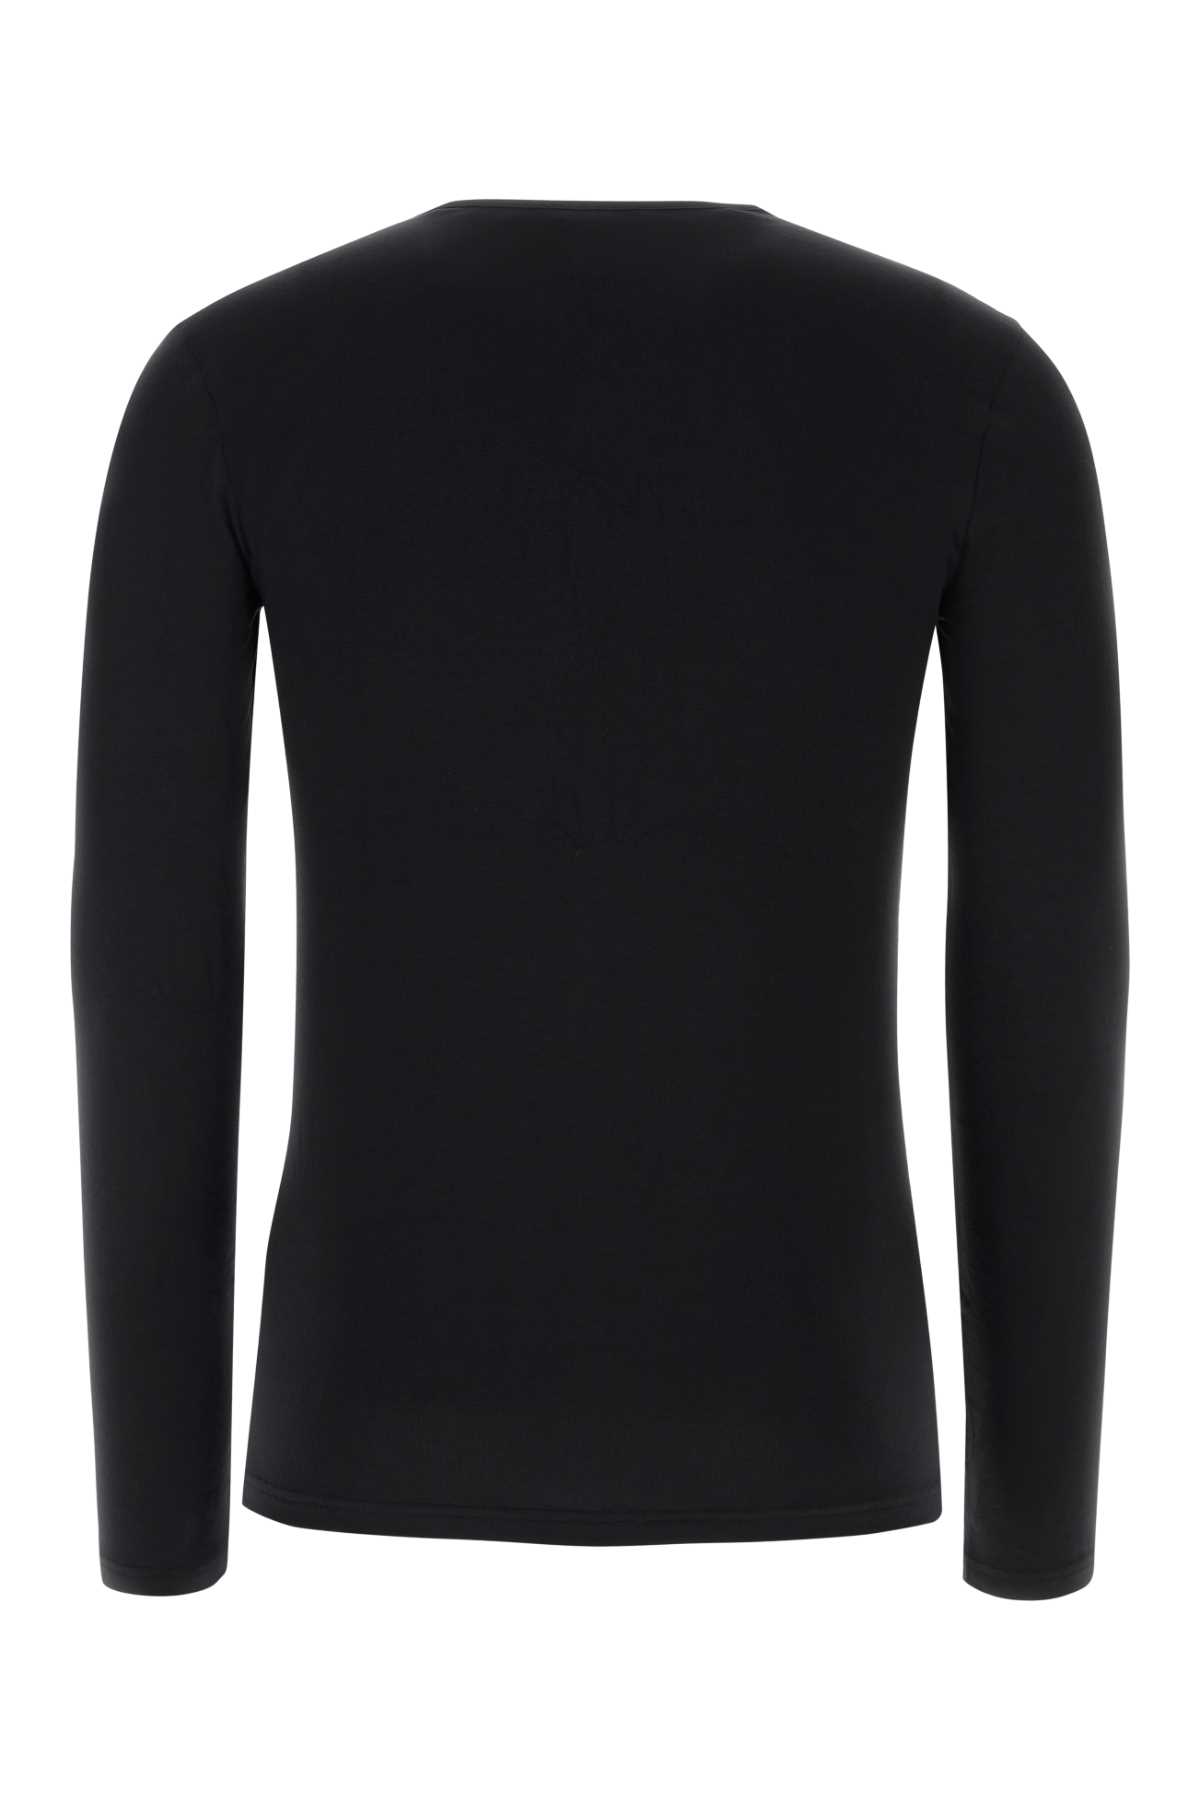 Versace Black Cotton Stretch T-shirt In A1008